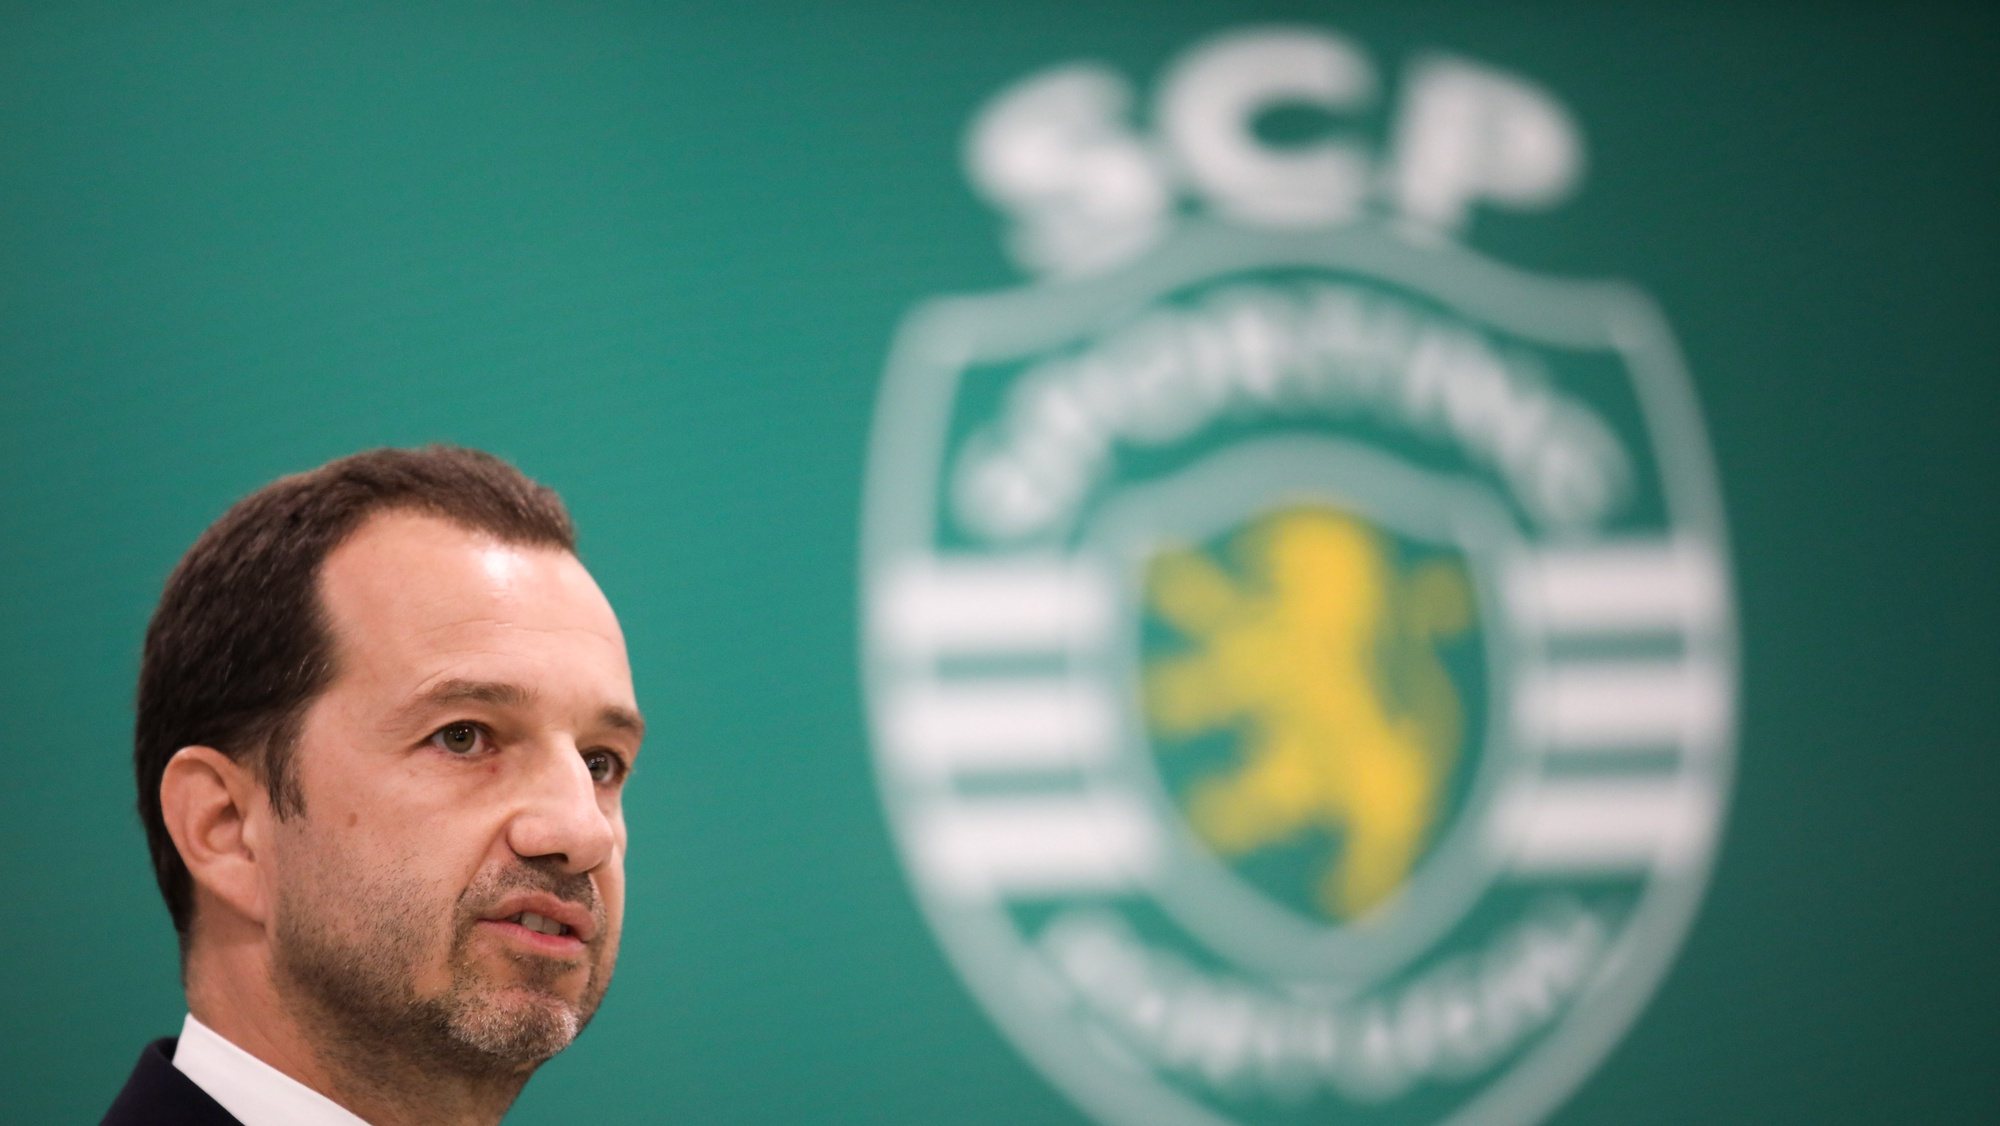 epa08272502 Sporting CP president Frederico Varandas speaks during the presentation of Sporting&#039;s new coach Ruben Amorim (unseen) at Alvalade stadium in Lisbon, Portugal, 05 March 2020. The 35-year-old Amorin came from Braga.  EPA/ANDRE KOSTERS